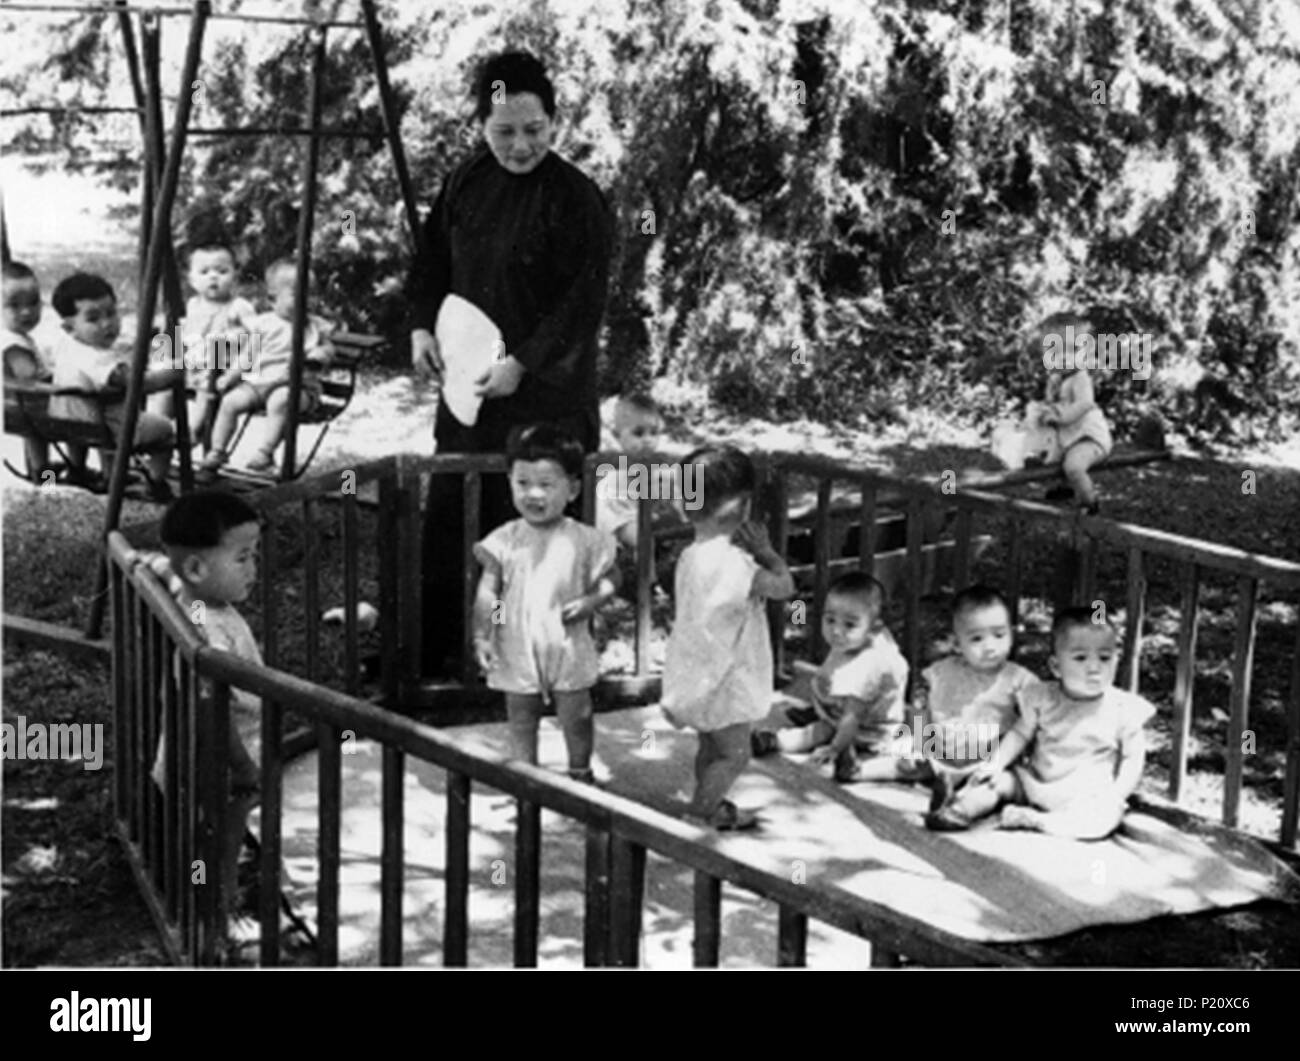 Shanghai. 13th June, 2018. File photo taken in Nov. 1951 shows Soong Ching Ling looking after children at a nursery of the China Welfare Institute (CWI) in Shanghai, east China. This year marks the 80th anniversary of the CWI, founded by Soong Ching Ling in 1938. The Shanghai-based organization focuses on maternal and child health, education and social welfare. Soong Ching Ling, born in Shanghai in 1893, was the wife of Chinese revolutionary Dr. Sun Yat-sen, who led the 1911 Revolution. Credit: CWI/Xinhua/Alamy Live News Stock Photo